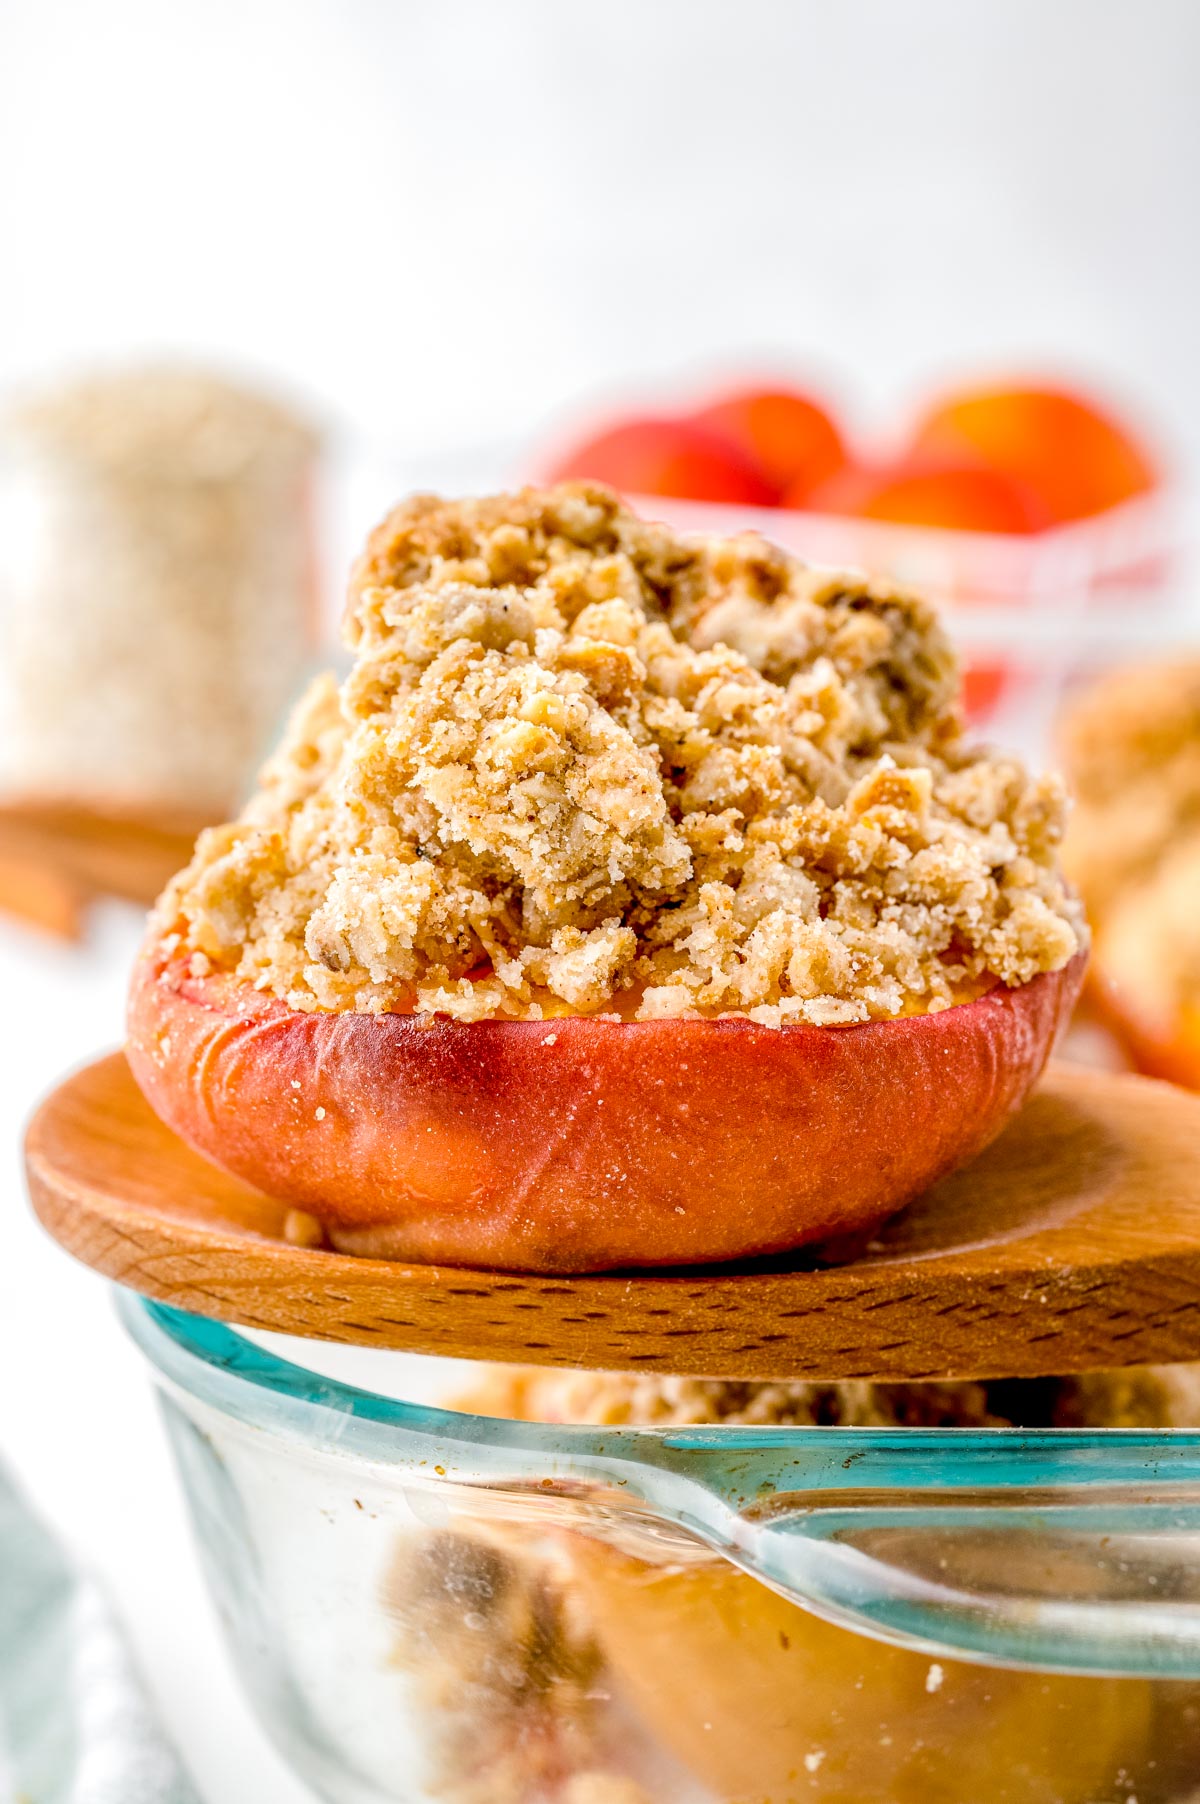 A wooden serving spoon picking up one of the Baked Peaches with Oatmeal from the baking dish.